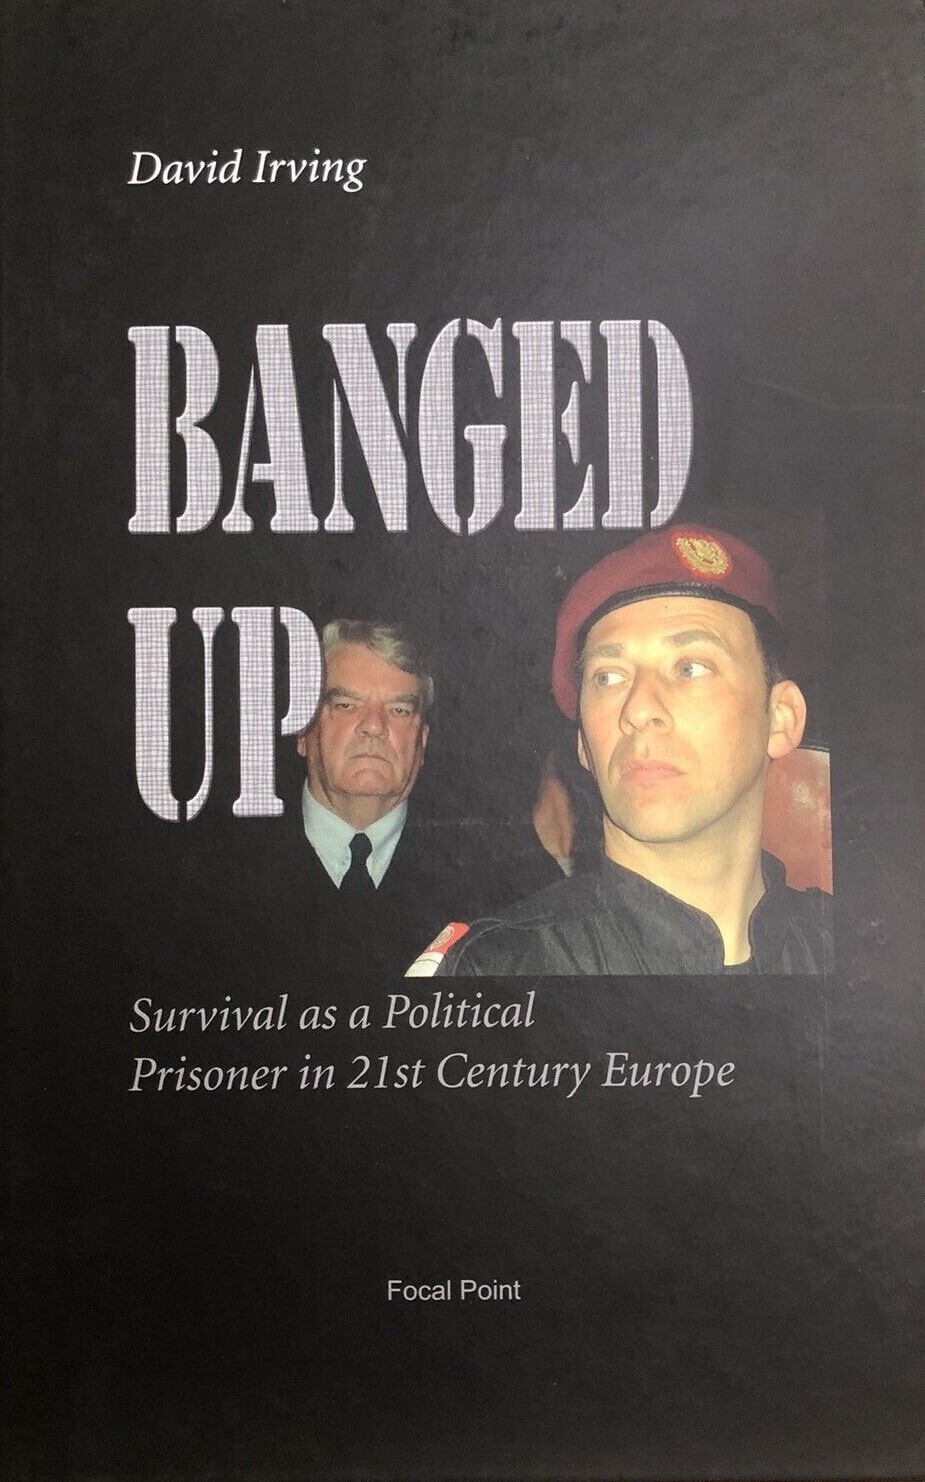 Banged Up: Survival as a Political Prisoner in 21st Century Europe